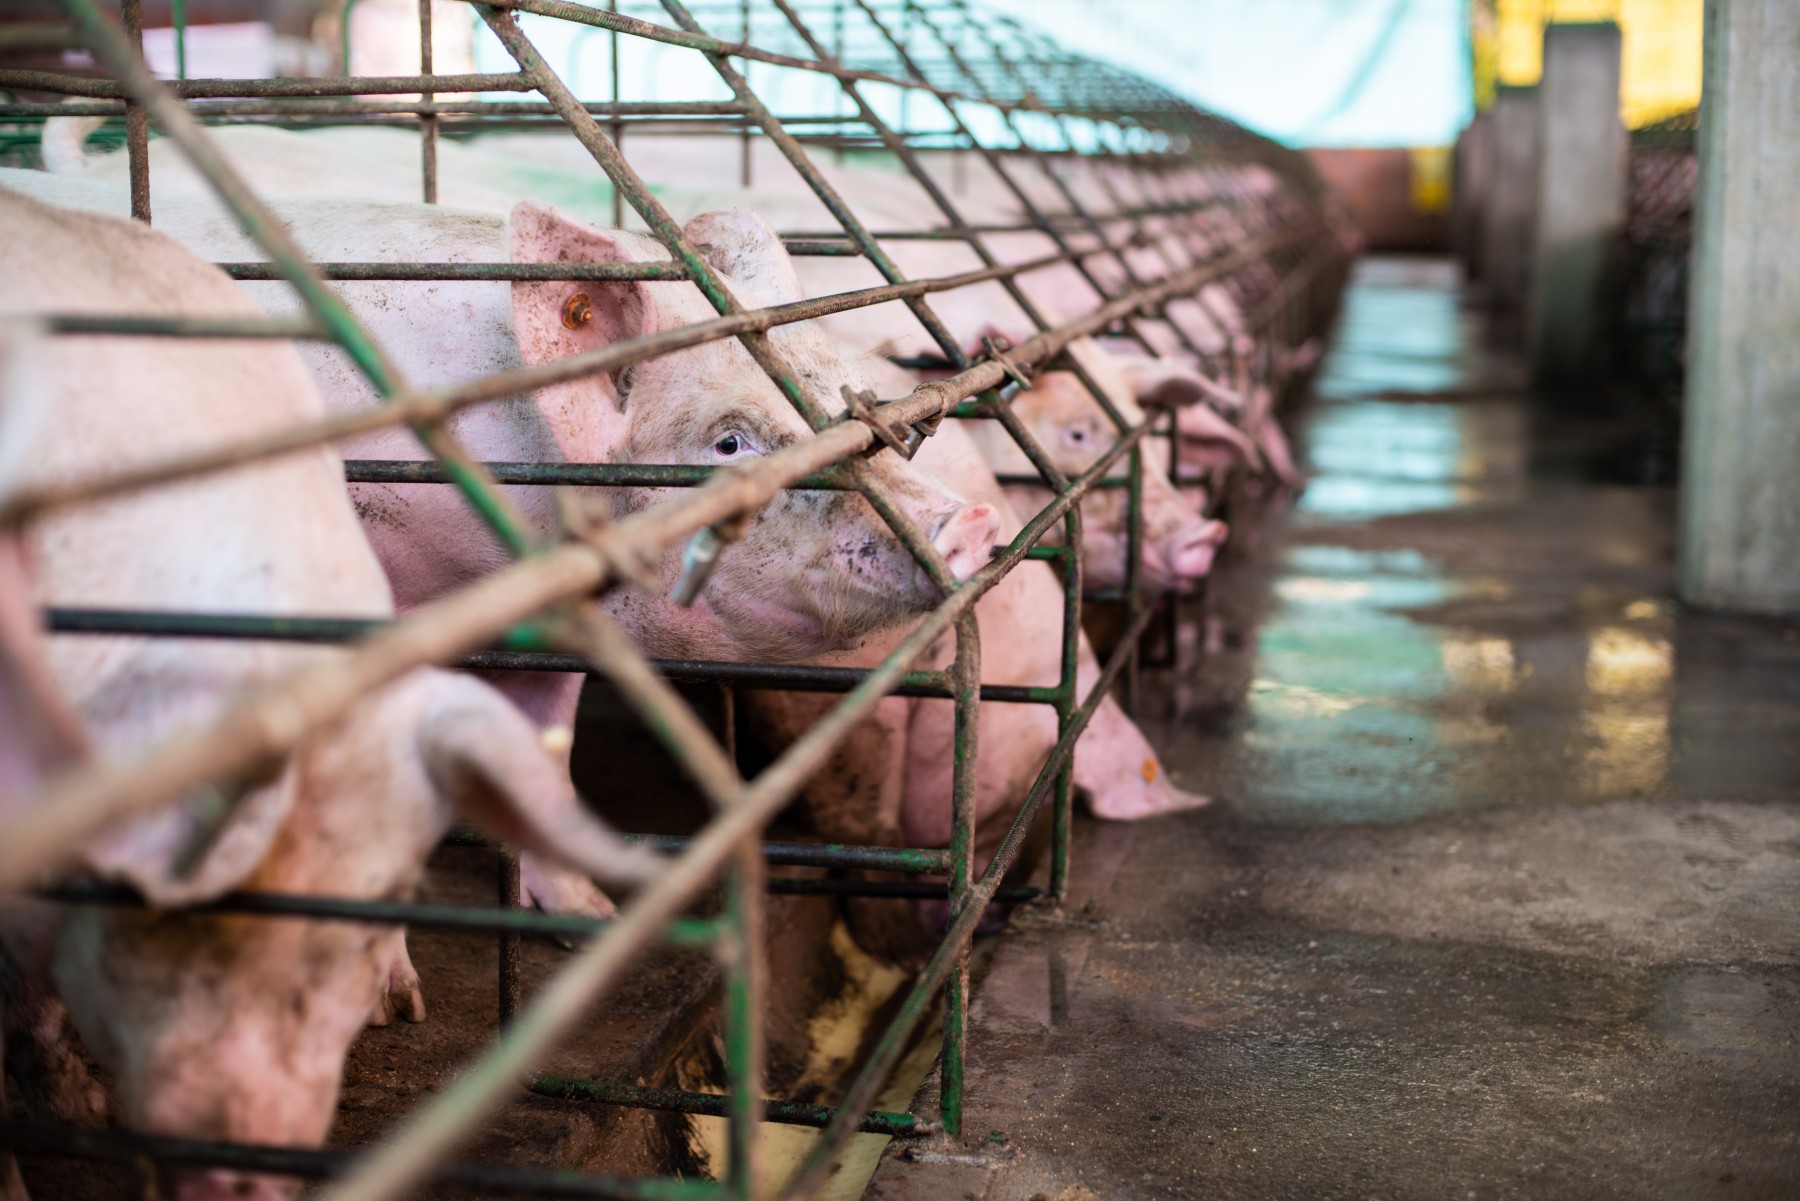 Mother pigs in individual cages are unable to move, turn around or socialize during their pregnancy.